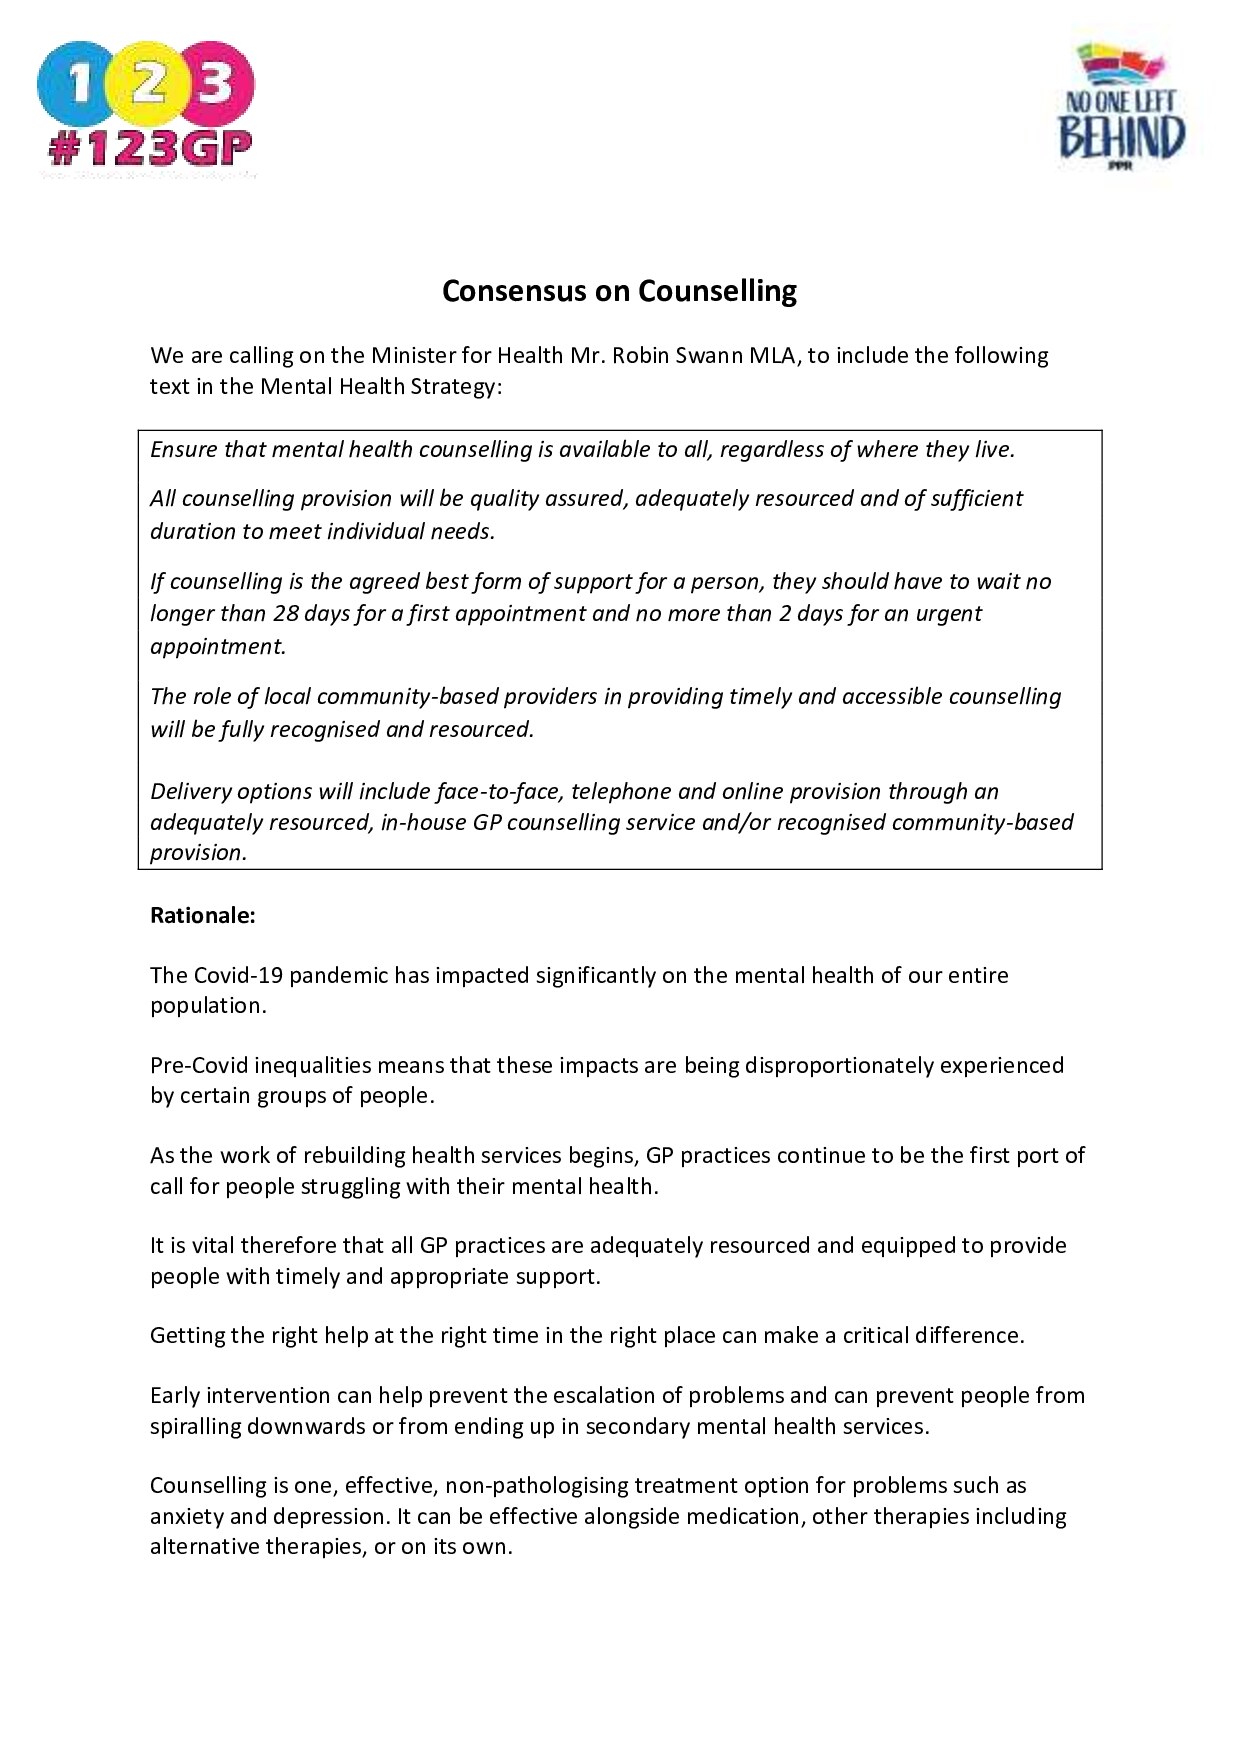 Consensus on Counselling Statement